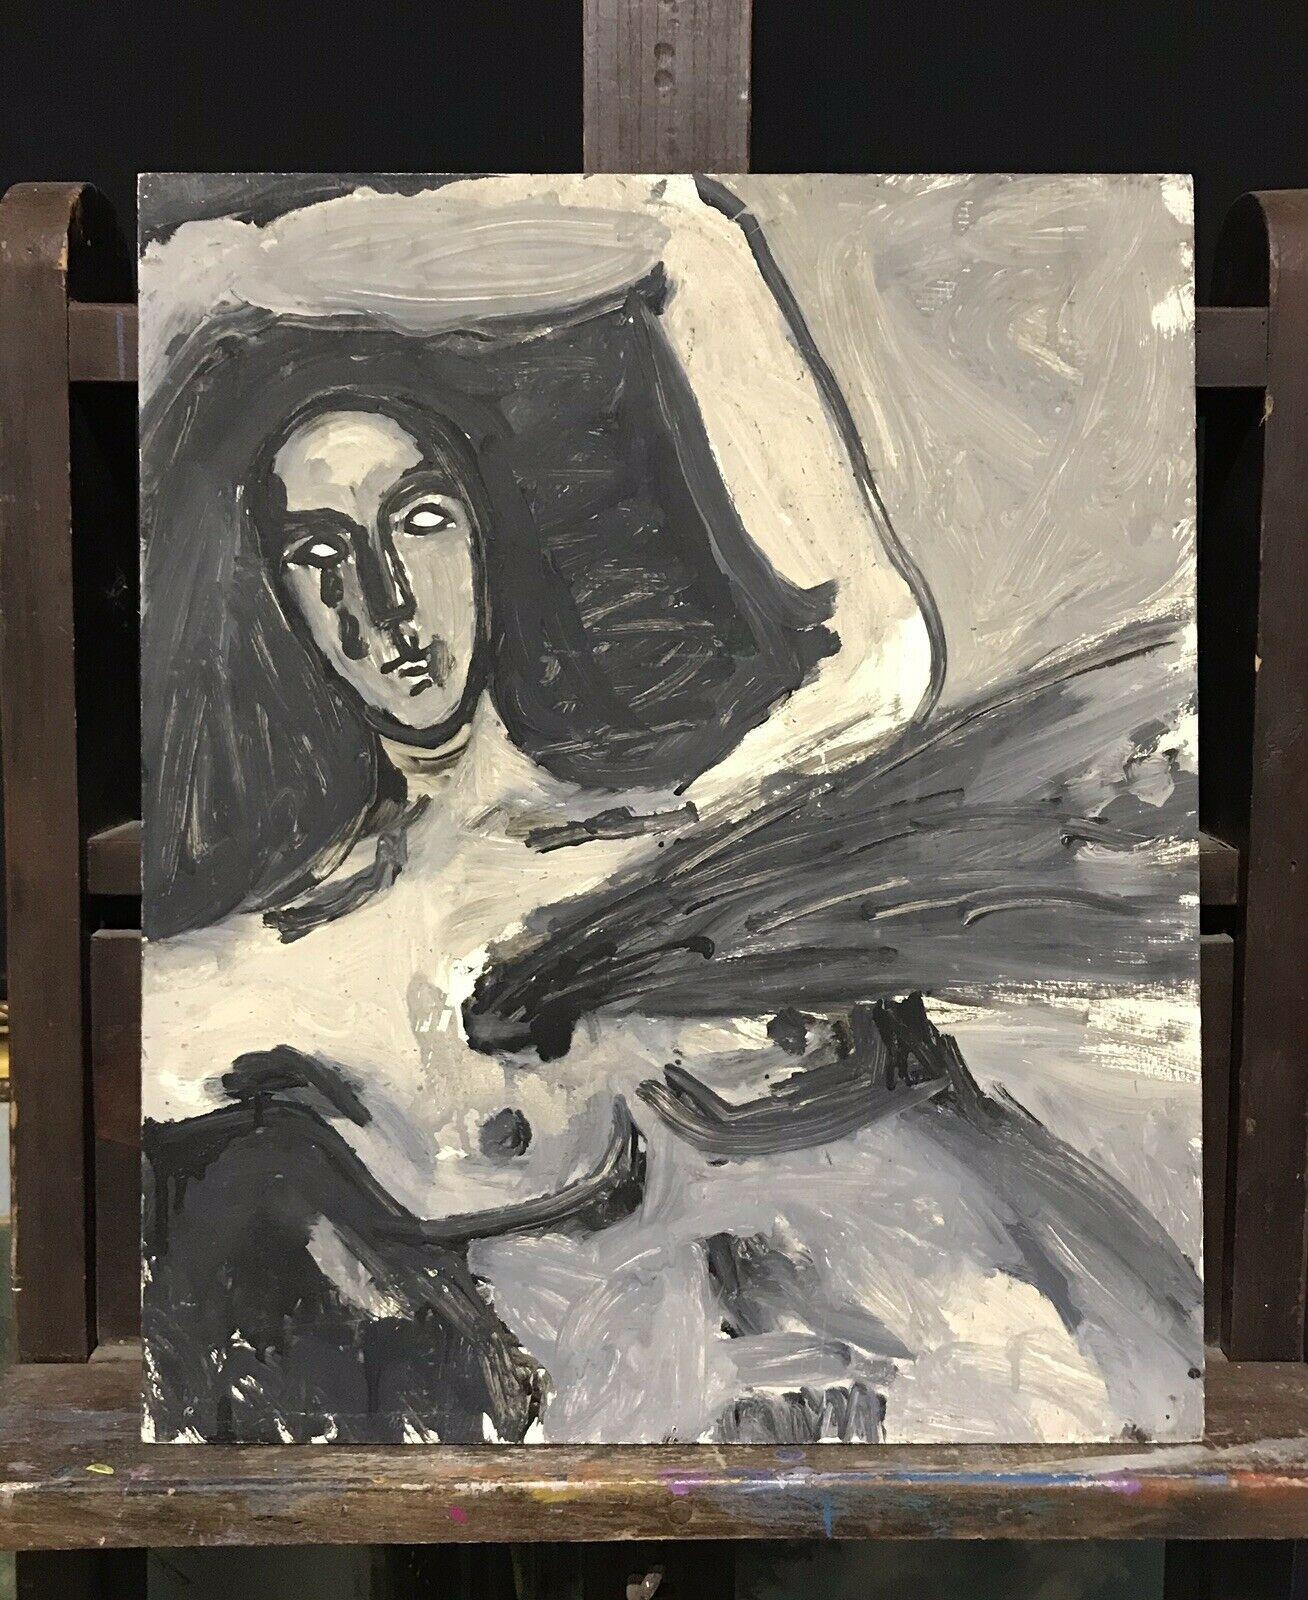 1960's FRENCH MODERNIST ABSTRACT PORTRAIT OF NUDE LADY - BLACK & WHITE - Abstract Expressionist Painting by Unknown